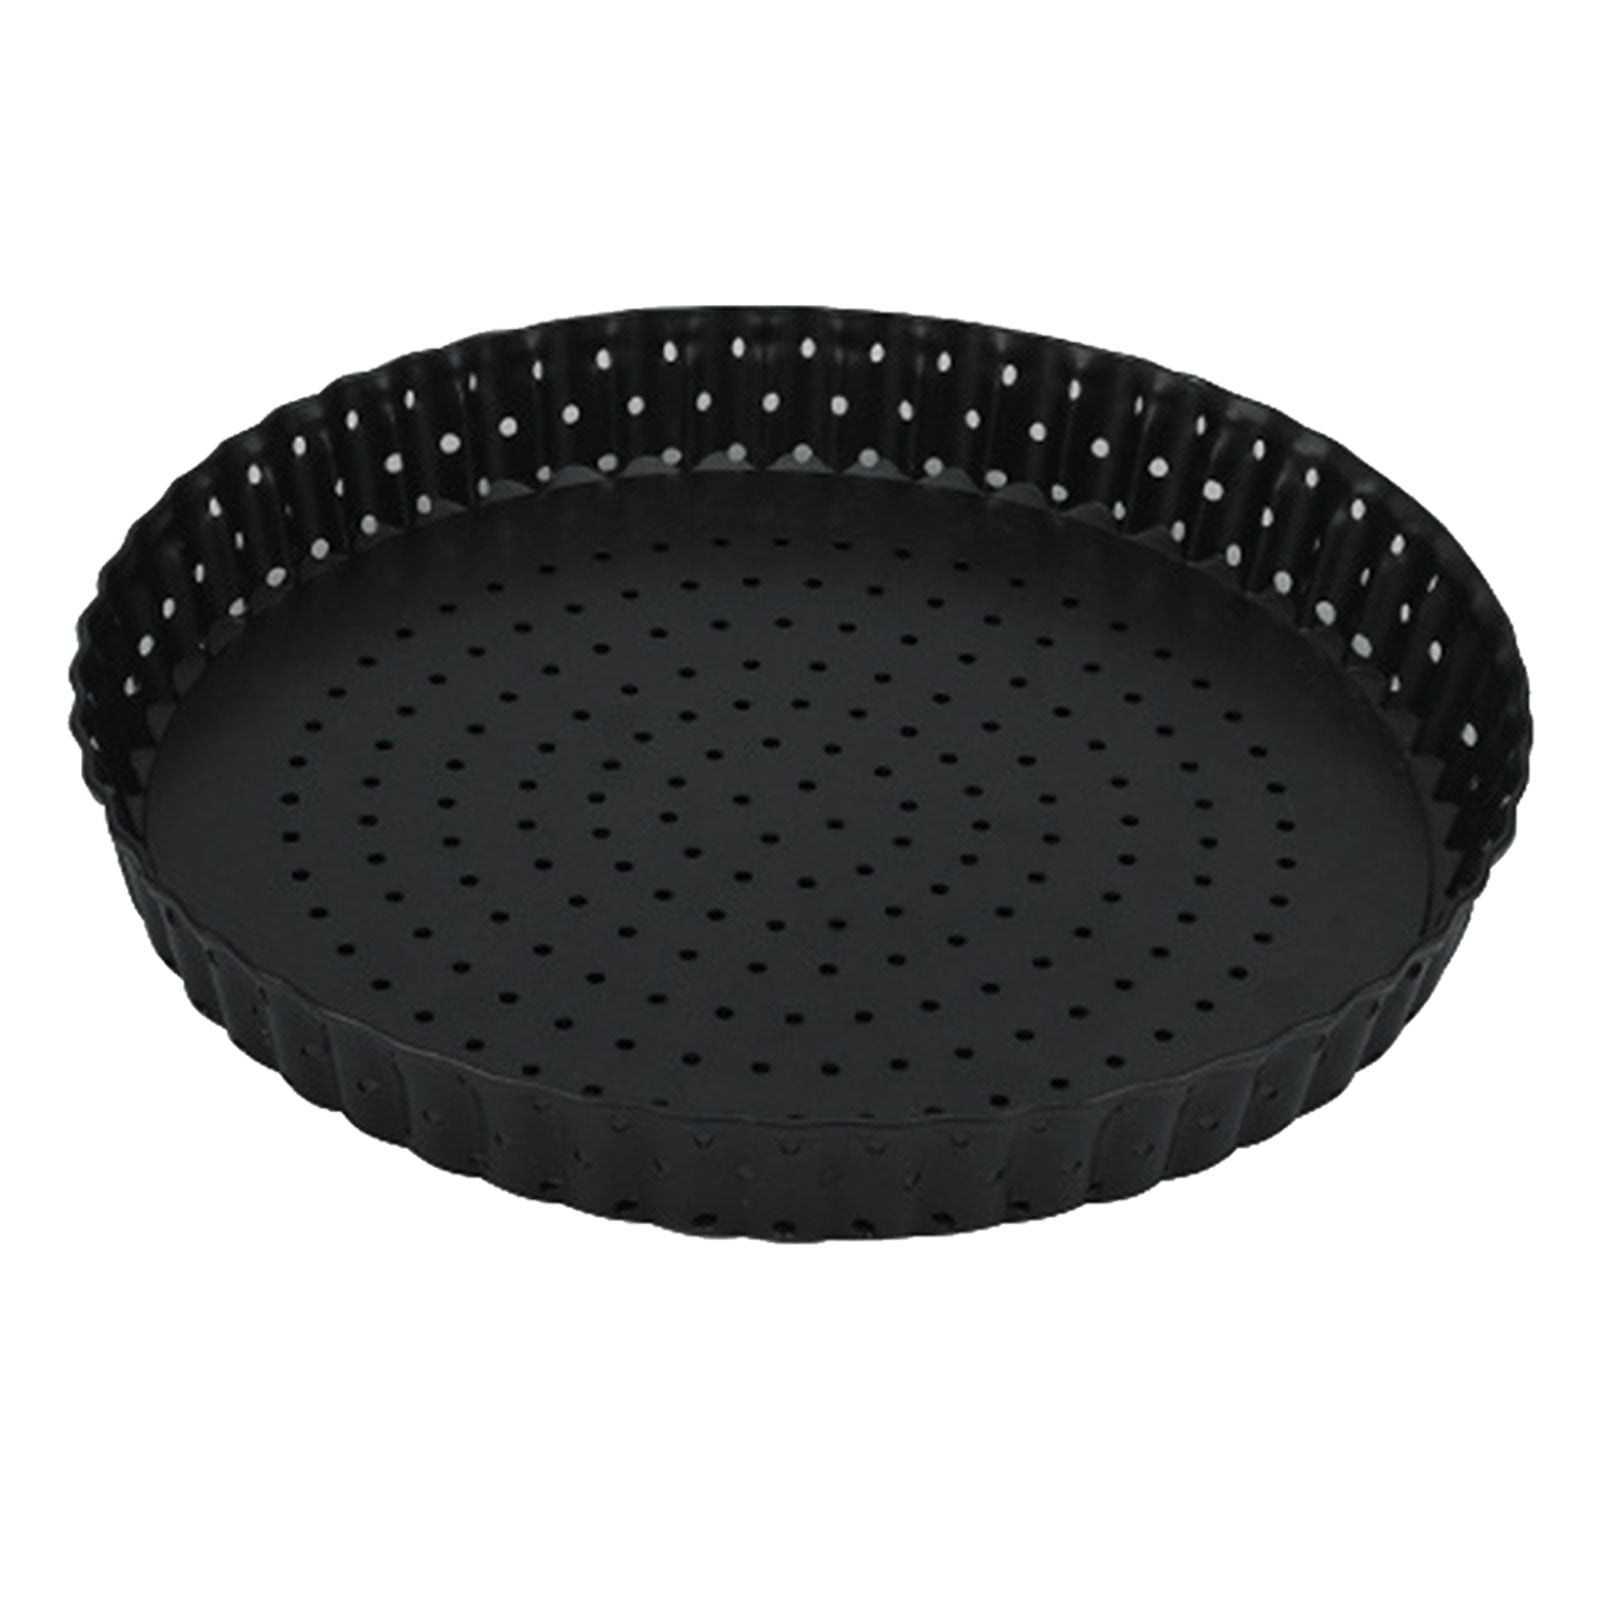 Details about   9 inch Non-stick Pizza Bakeware Removable Loose Bottom Tart Pie Pan Tools 